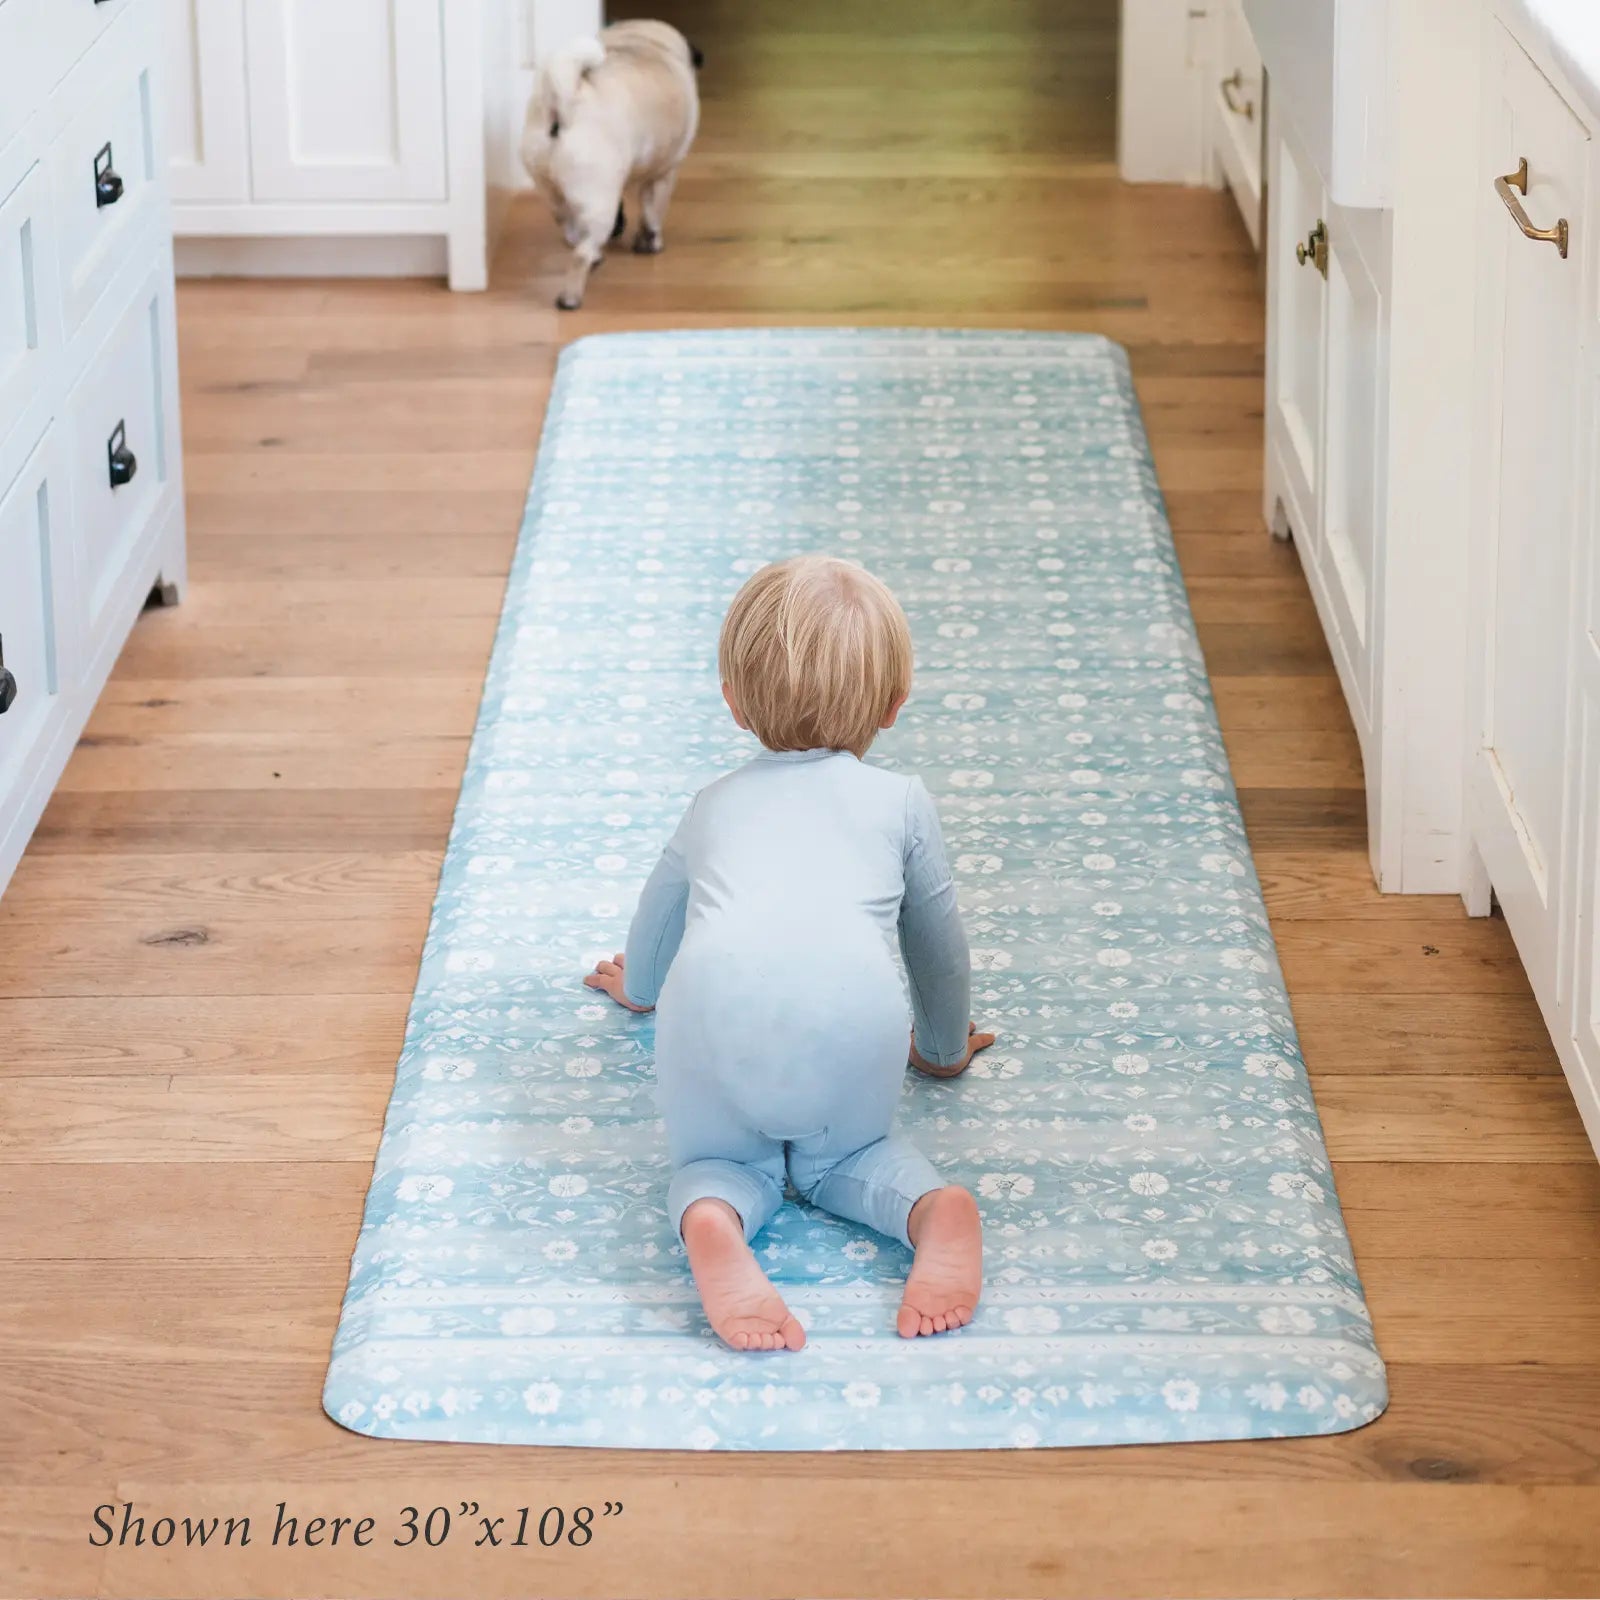 Nama standing mat Gemma sea blue floral with baby in kitchen shown in size 30x108